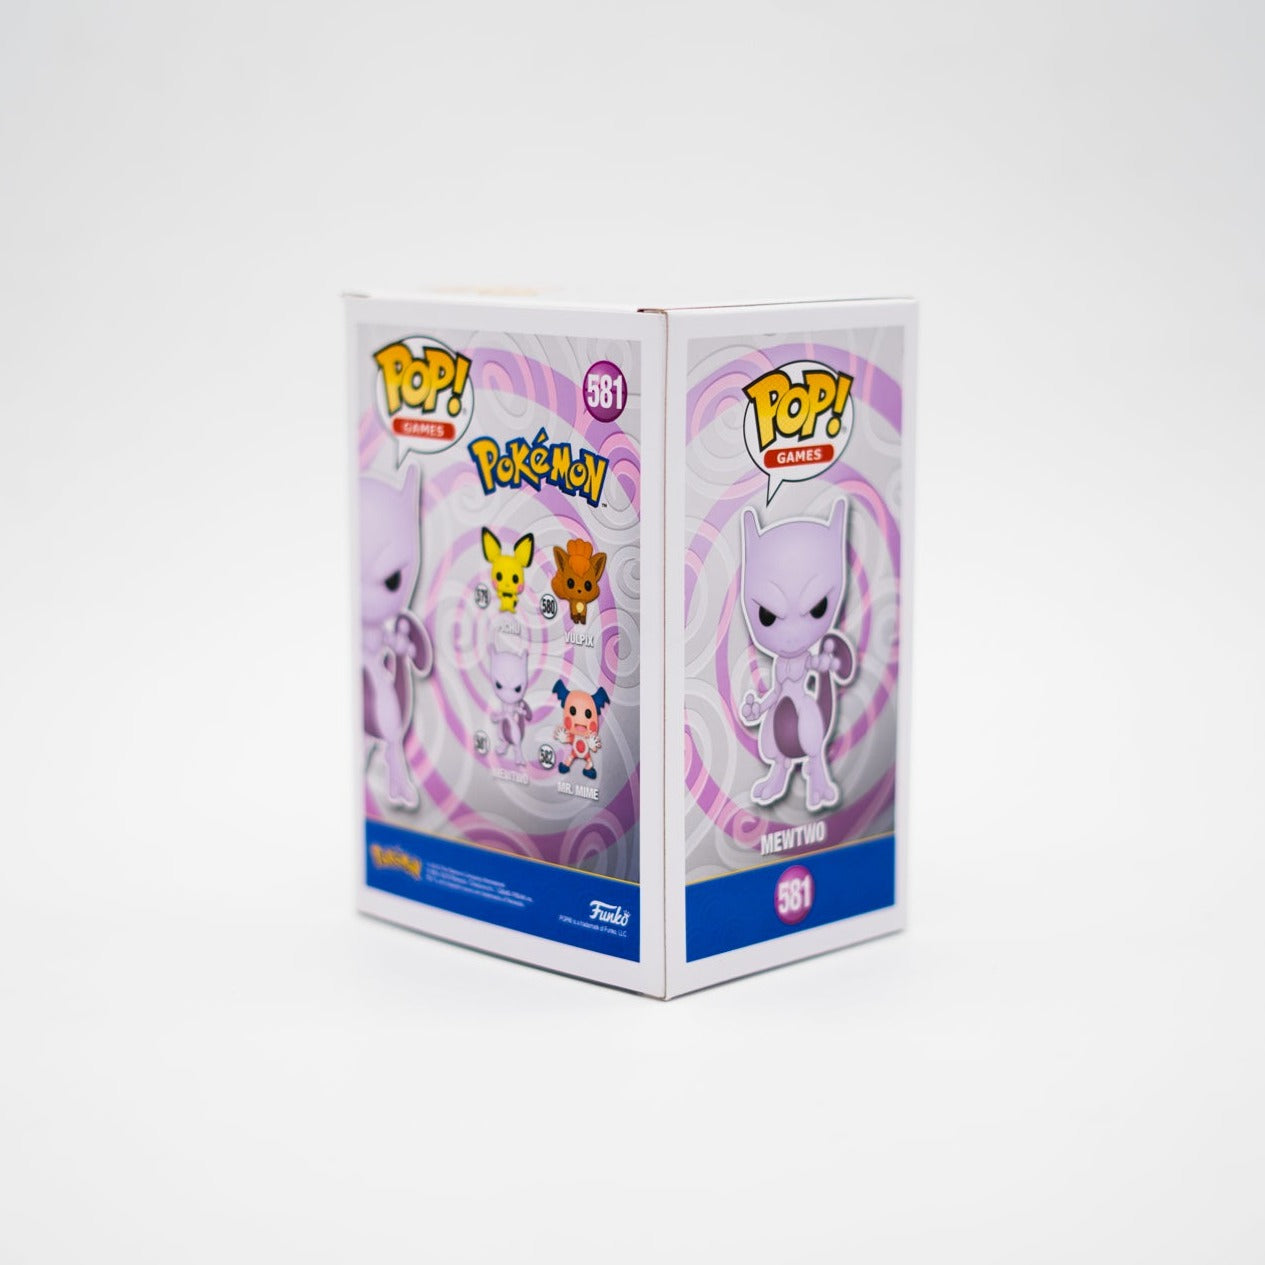 Funko Pop! Mewtwo 581 Flocked 2020 Funko Summer Convention Limited Edition